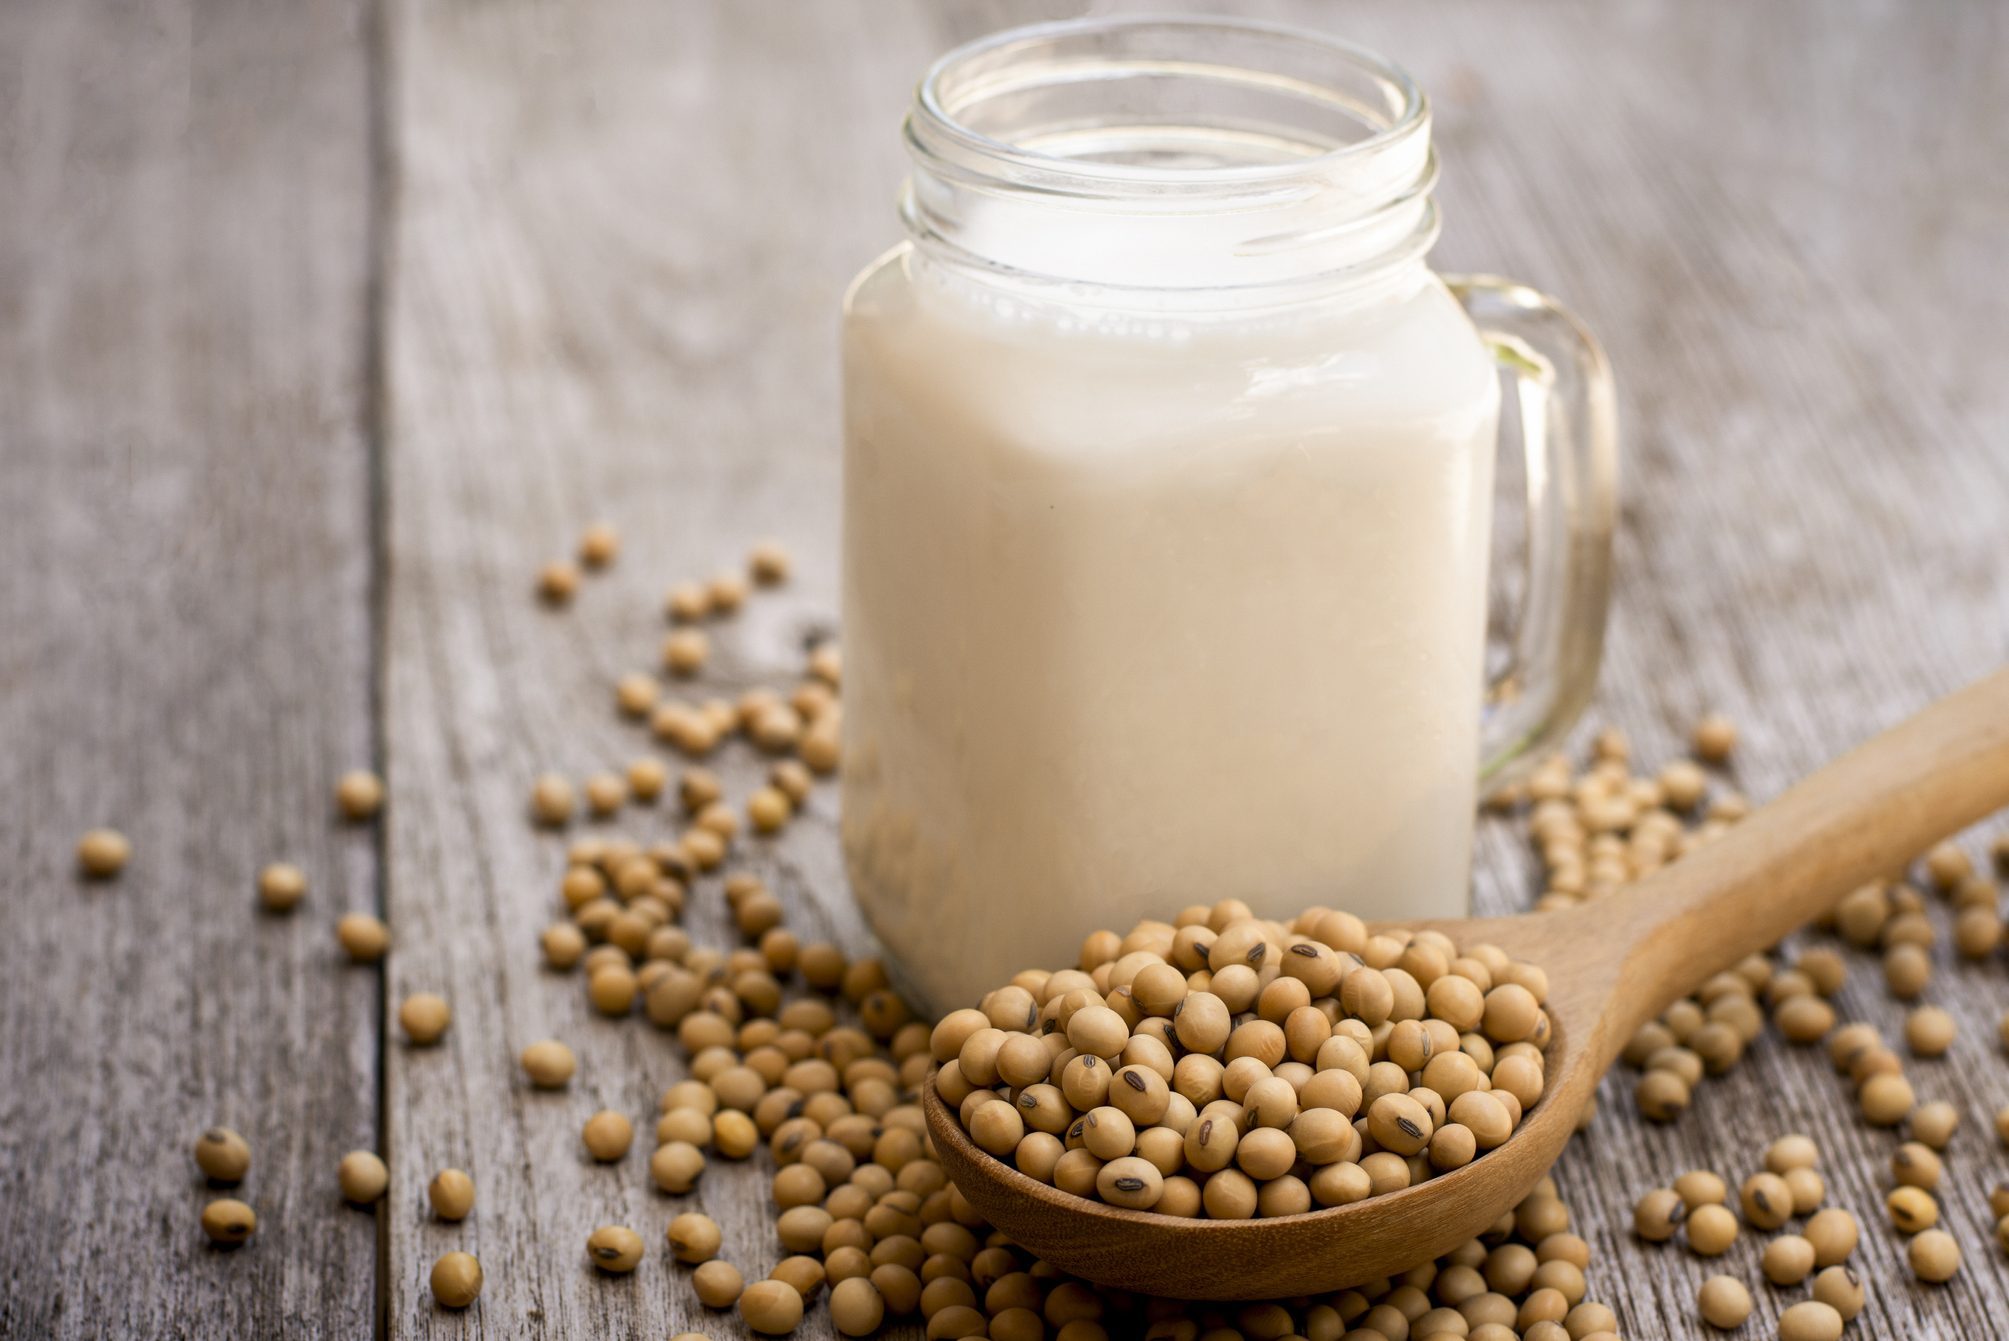 Is Soy Milk Good for You?